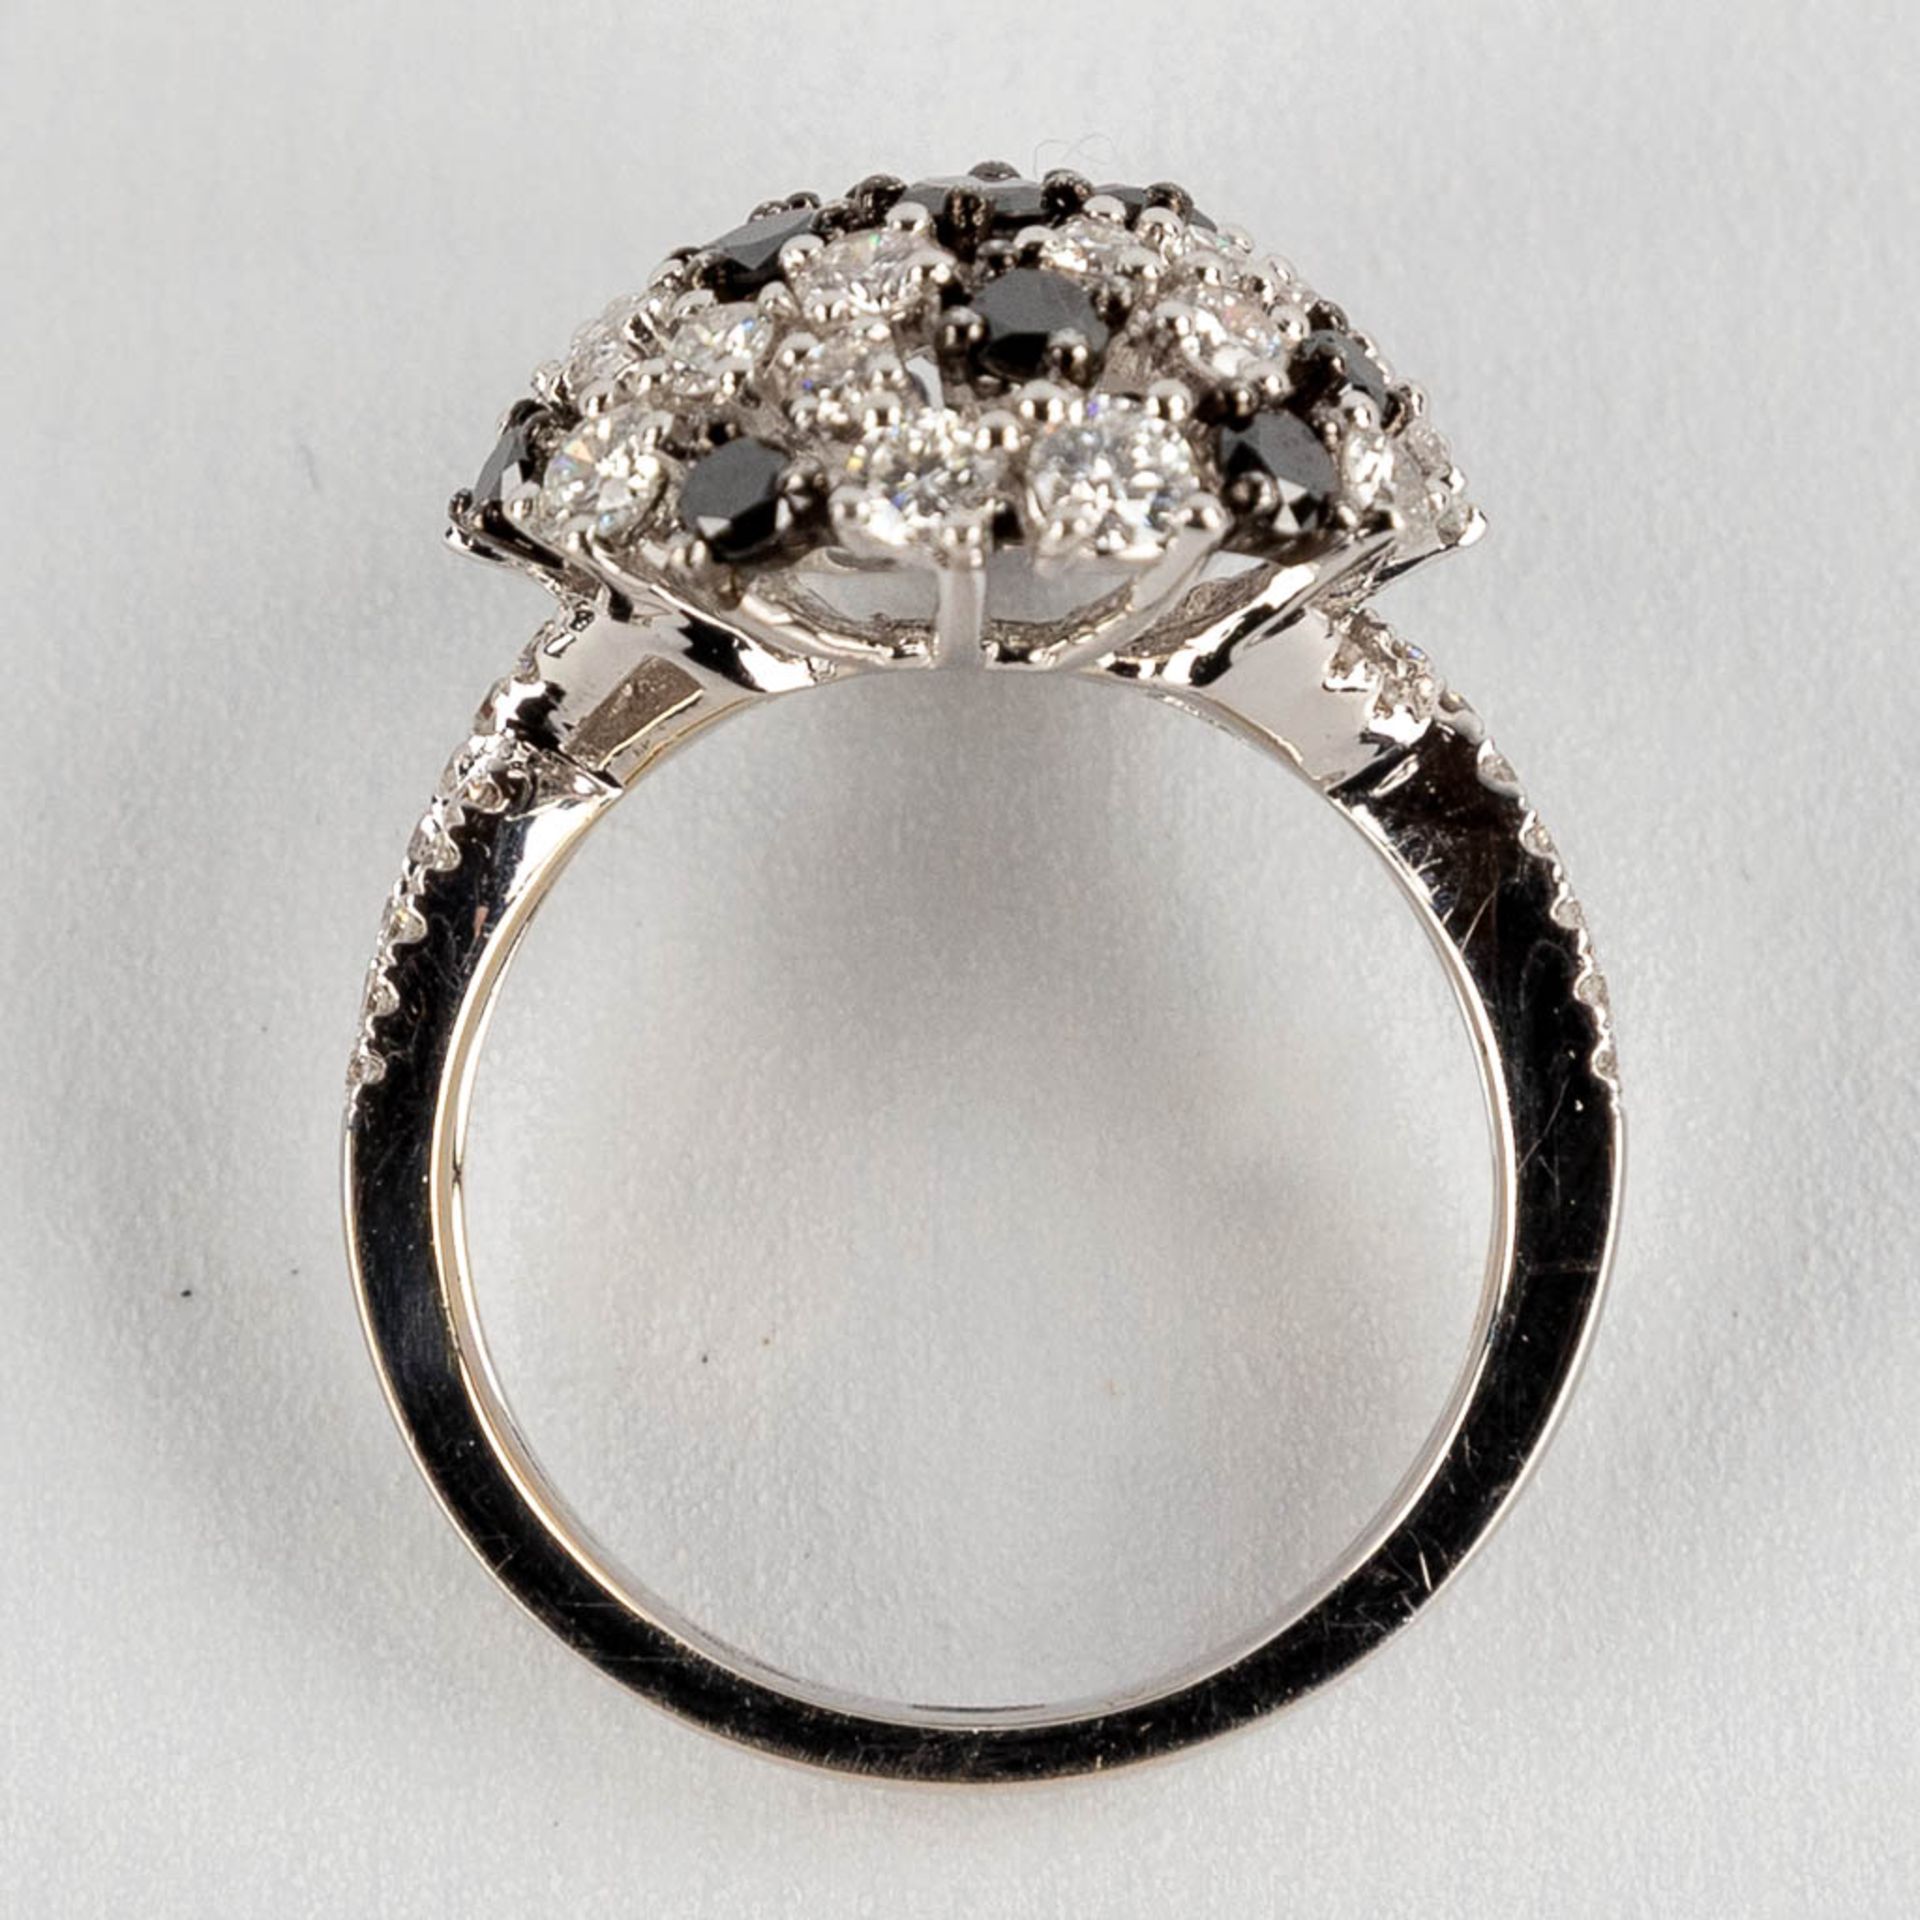 A ring, 18kt white gold with black and white diamonds, total approx. 1.81 ct. Ring size 54. - Image 7 of 10